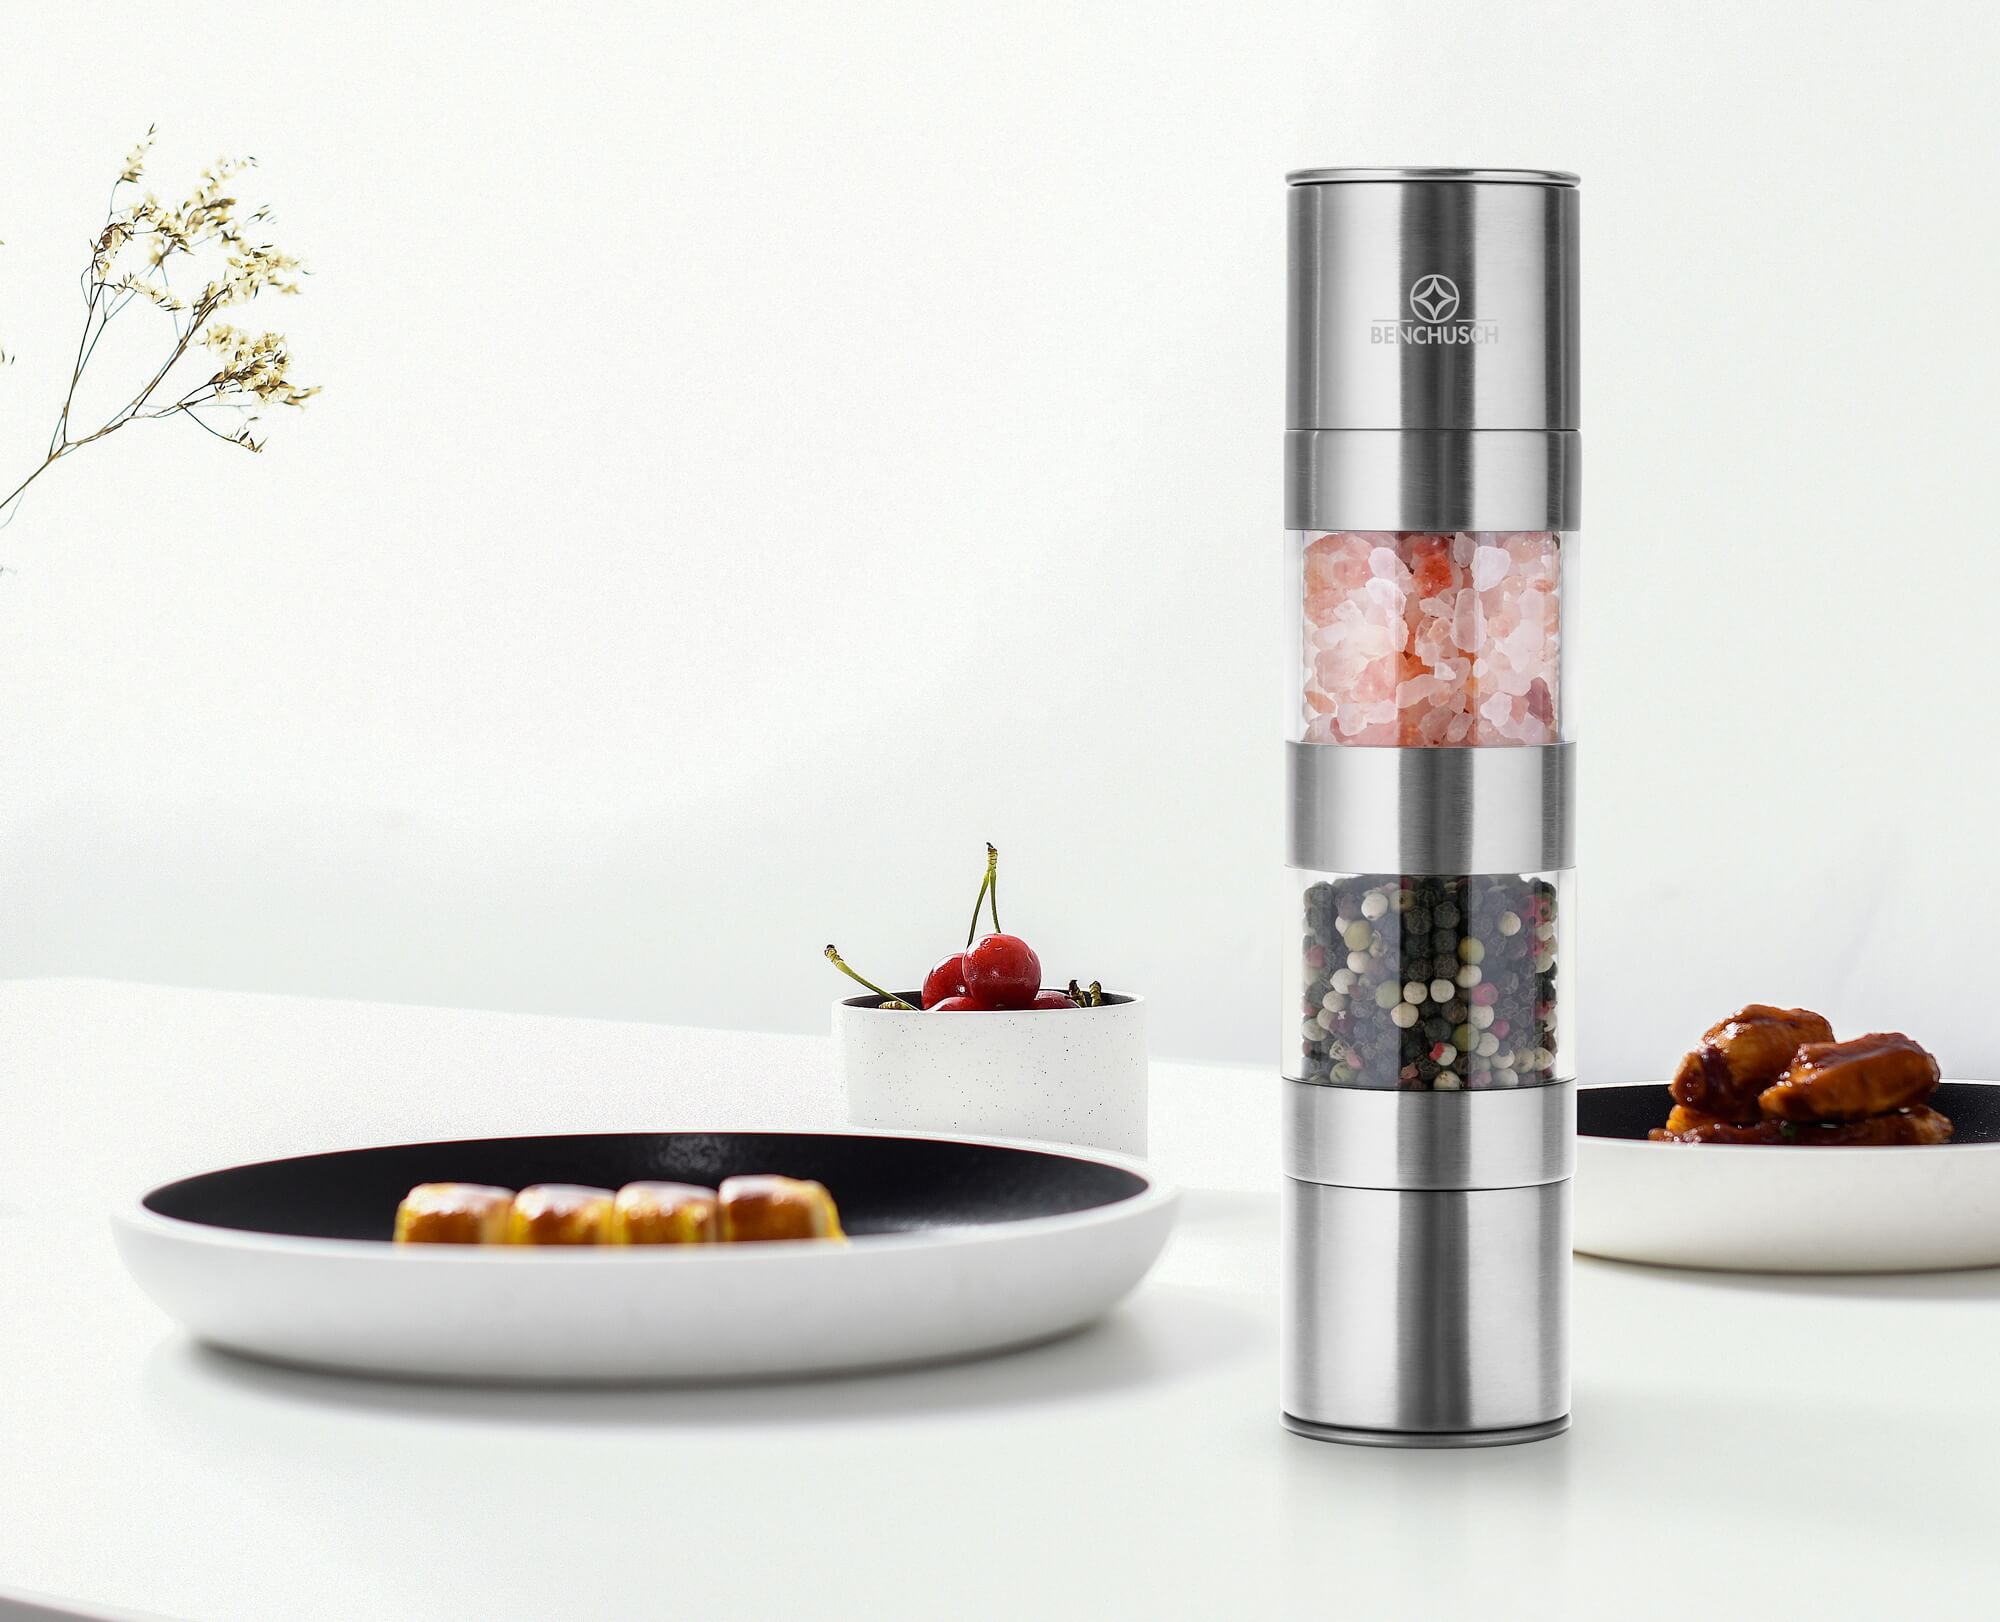 Benchusch Modern 2 in 1 Salt and Pepper Grinder on the dinning table with the other dishes